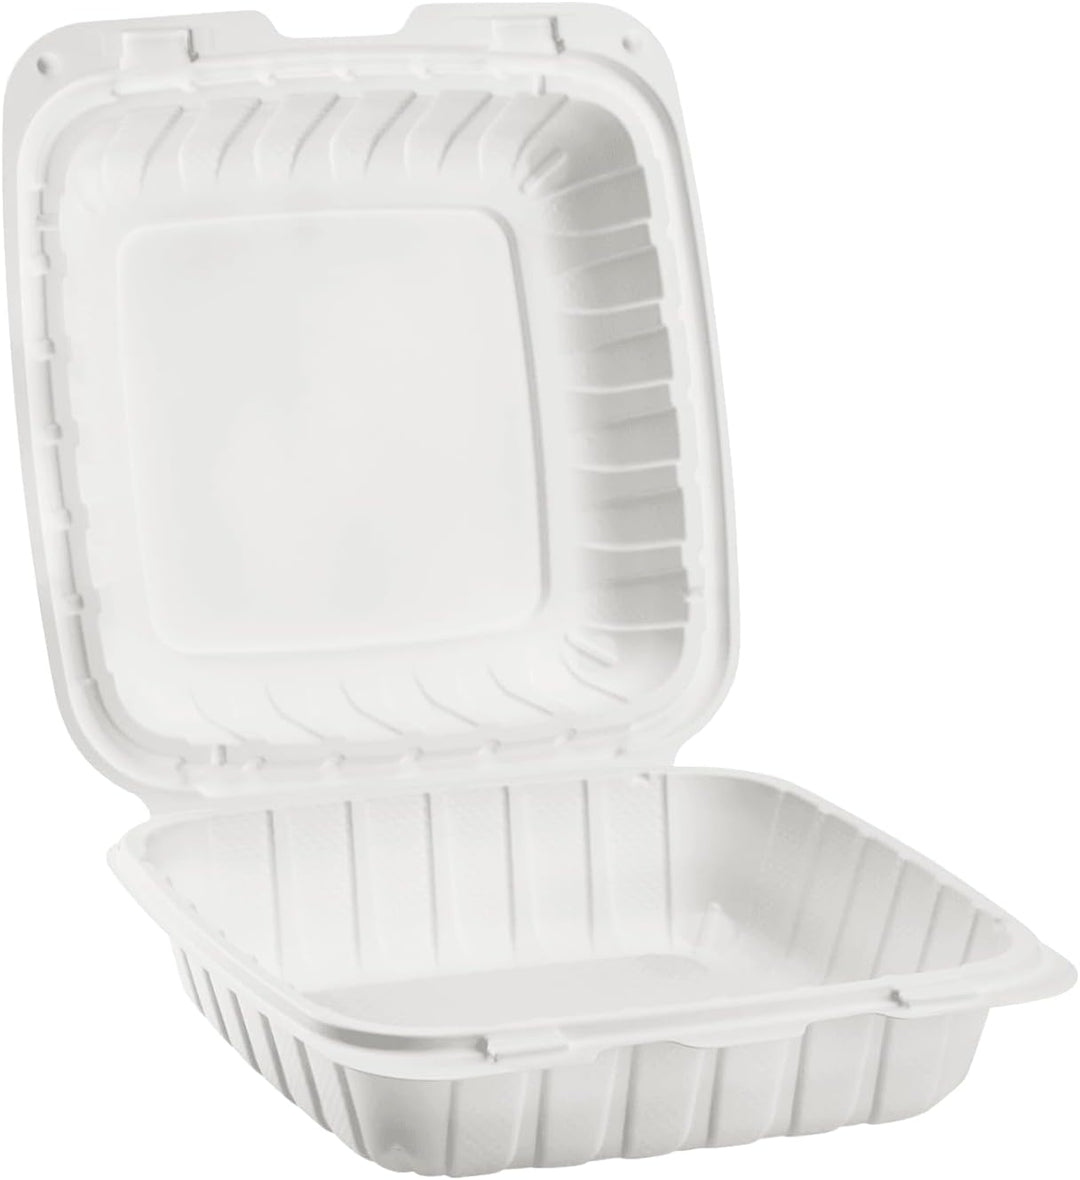 ITI TG-PM-88 8" x 8" x 3" White Plastic Hinged Container